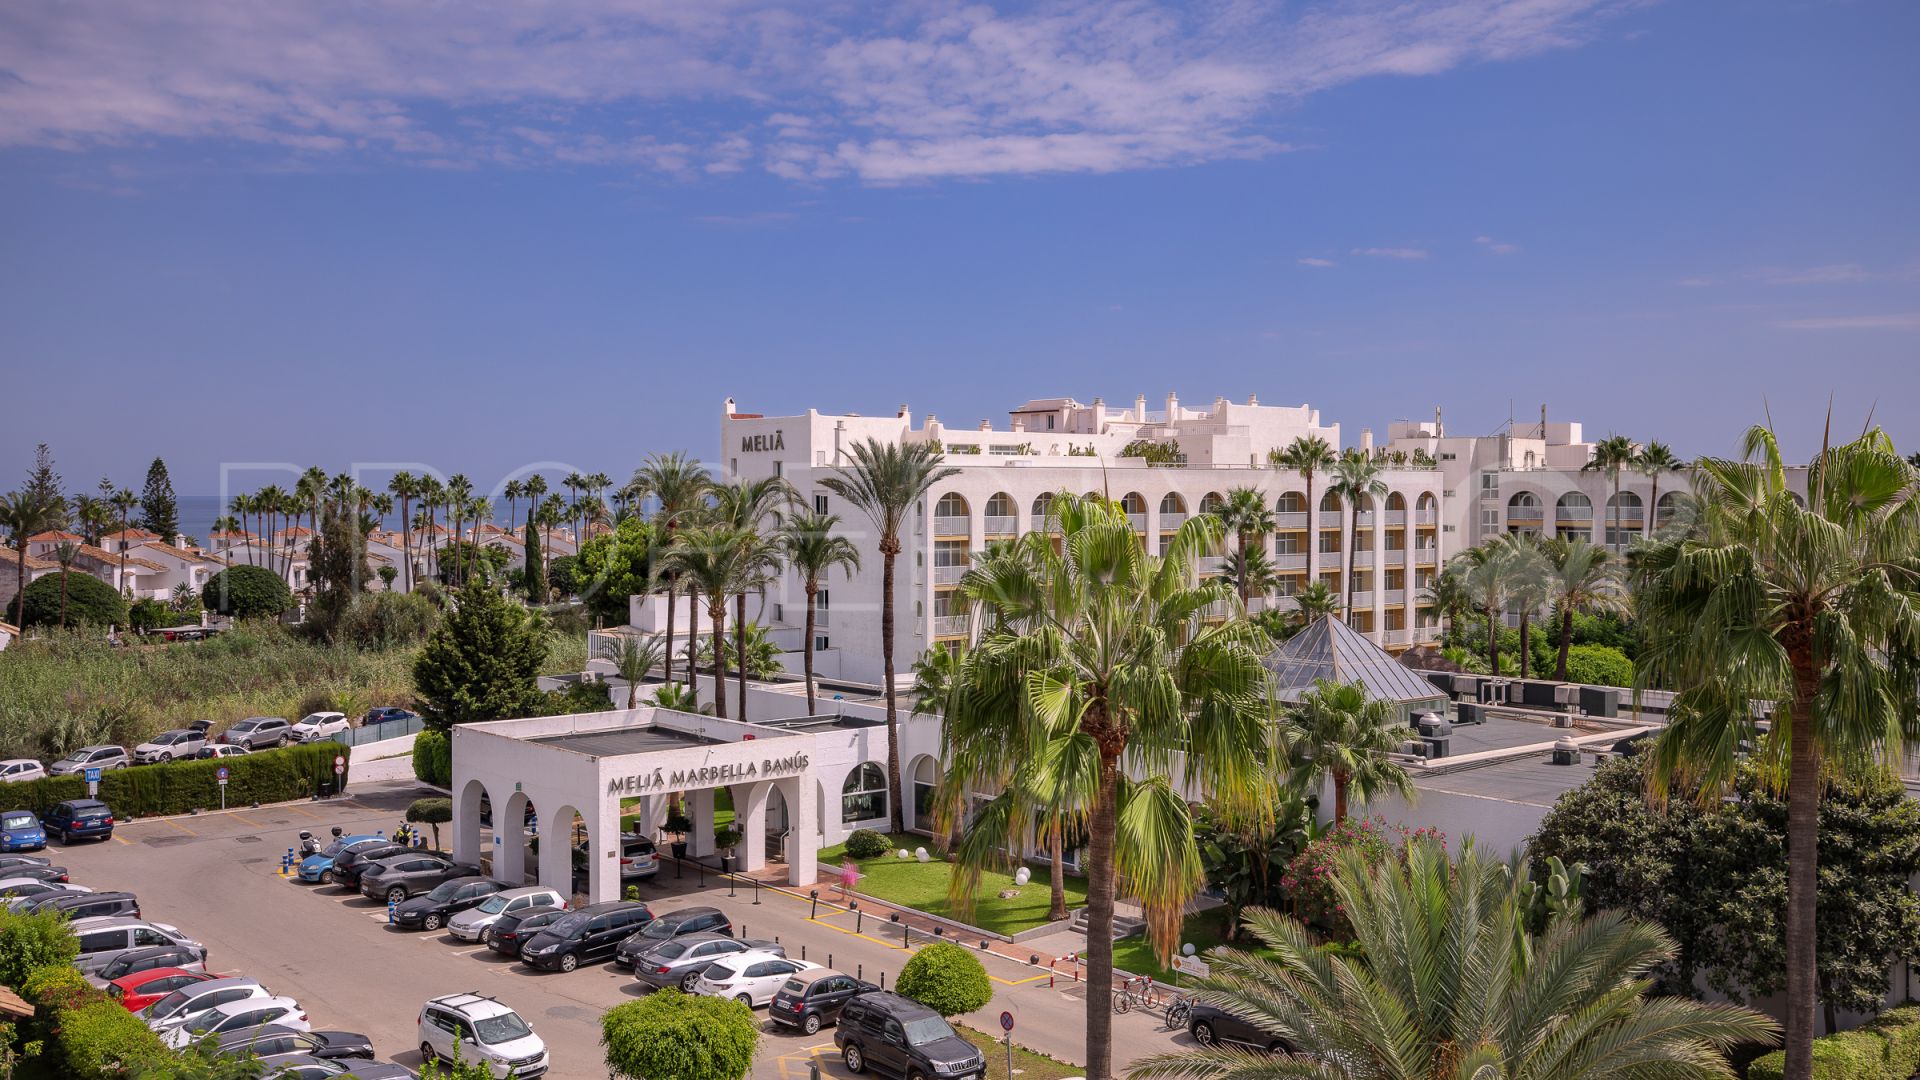 For sale Marbella - Puerto Banus duplex penthouse with 2 bedrooms